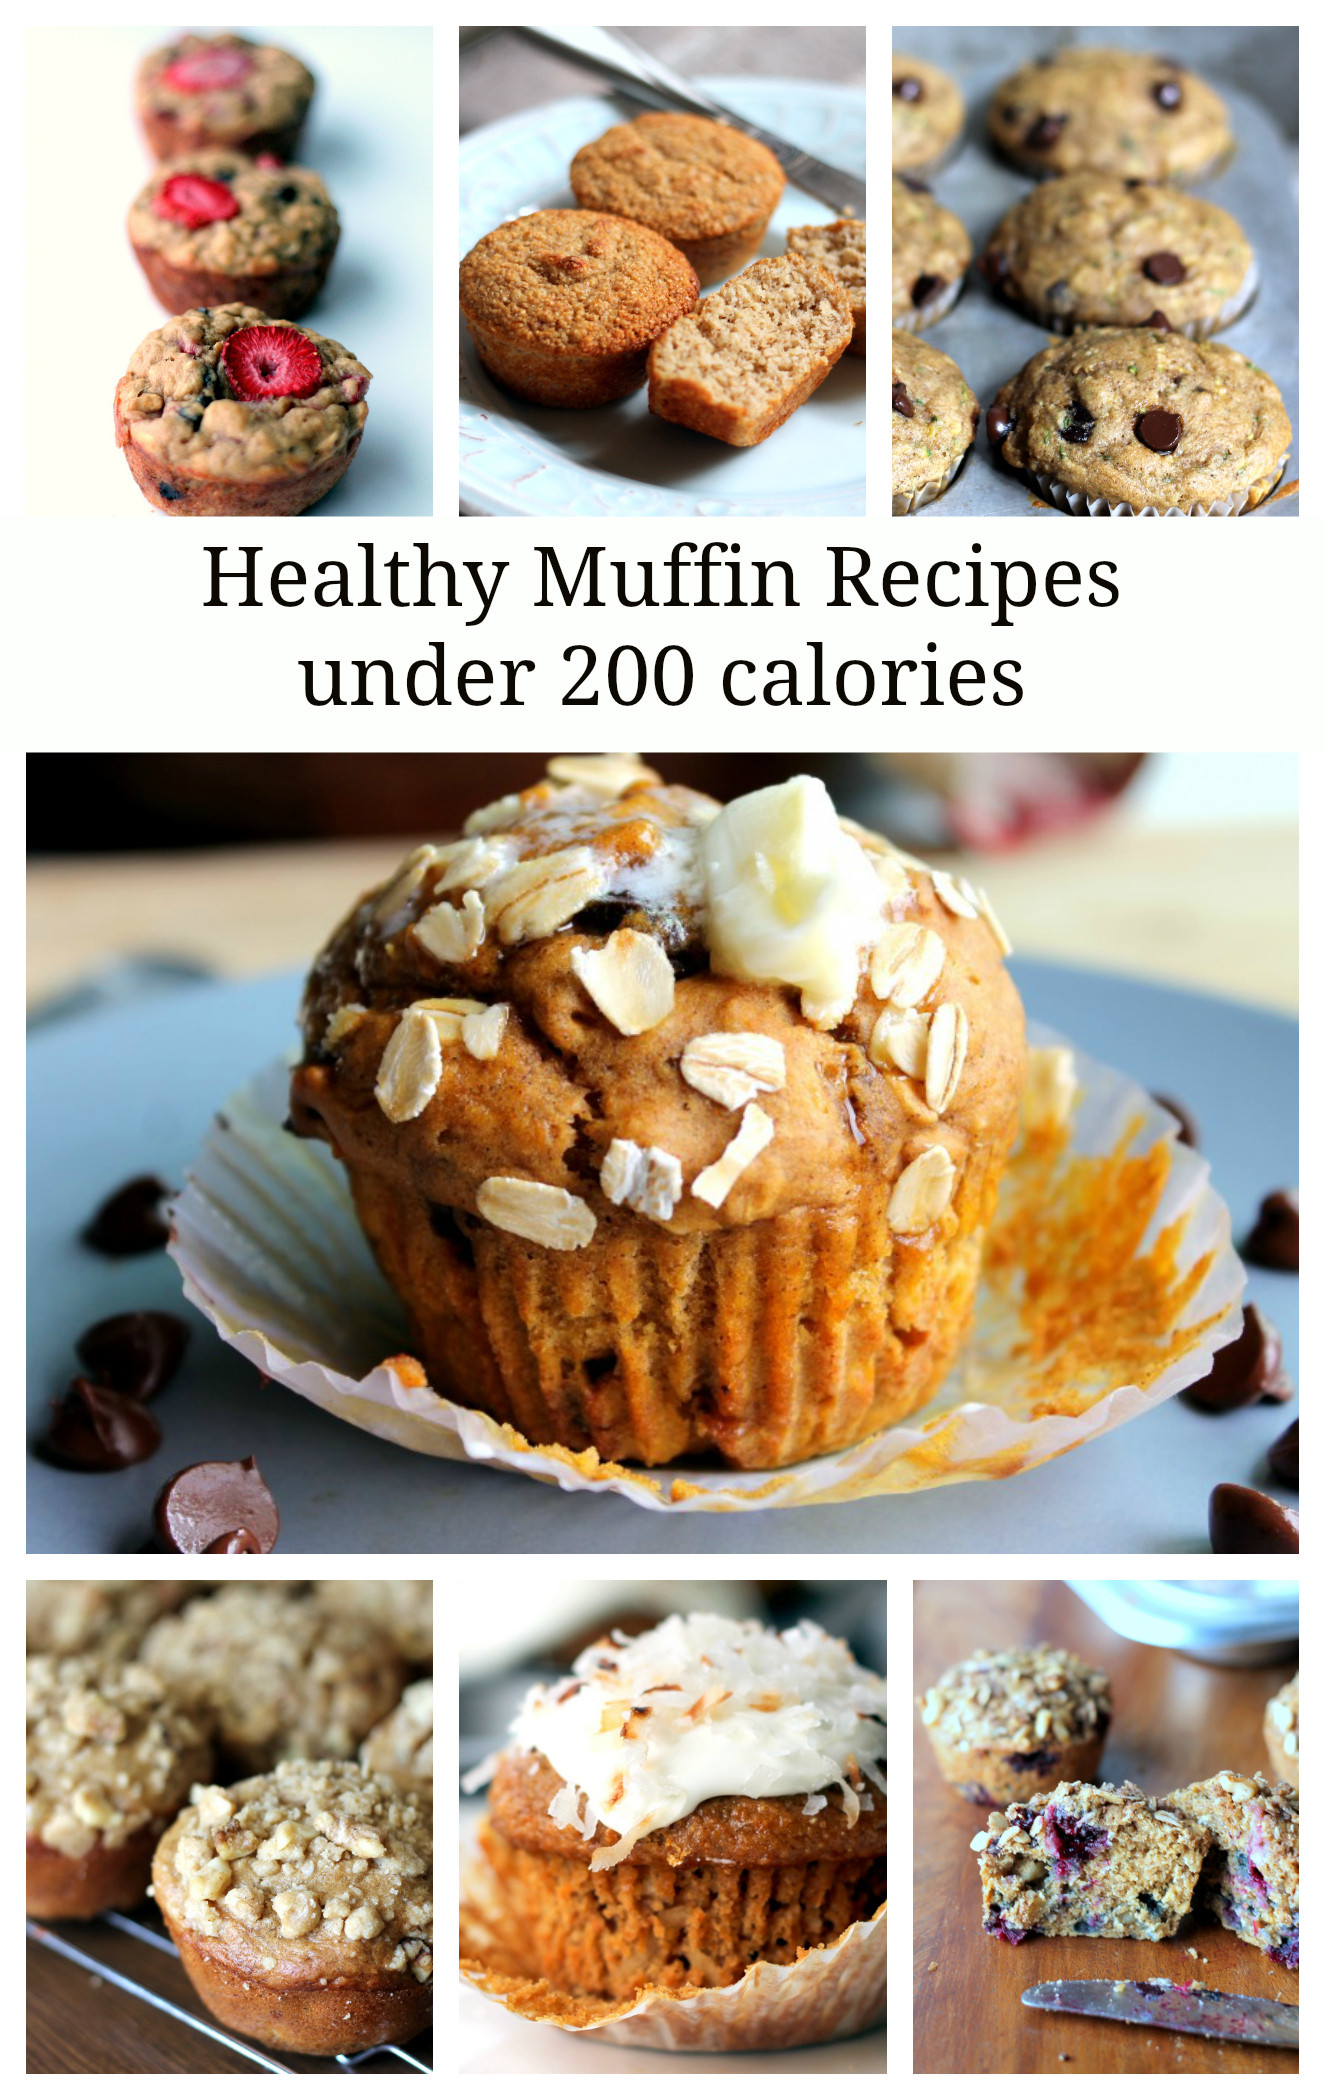 Healthy Muffins For Breakfast
 7 Healthy Muffin Recipes Under 200 Calories